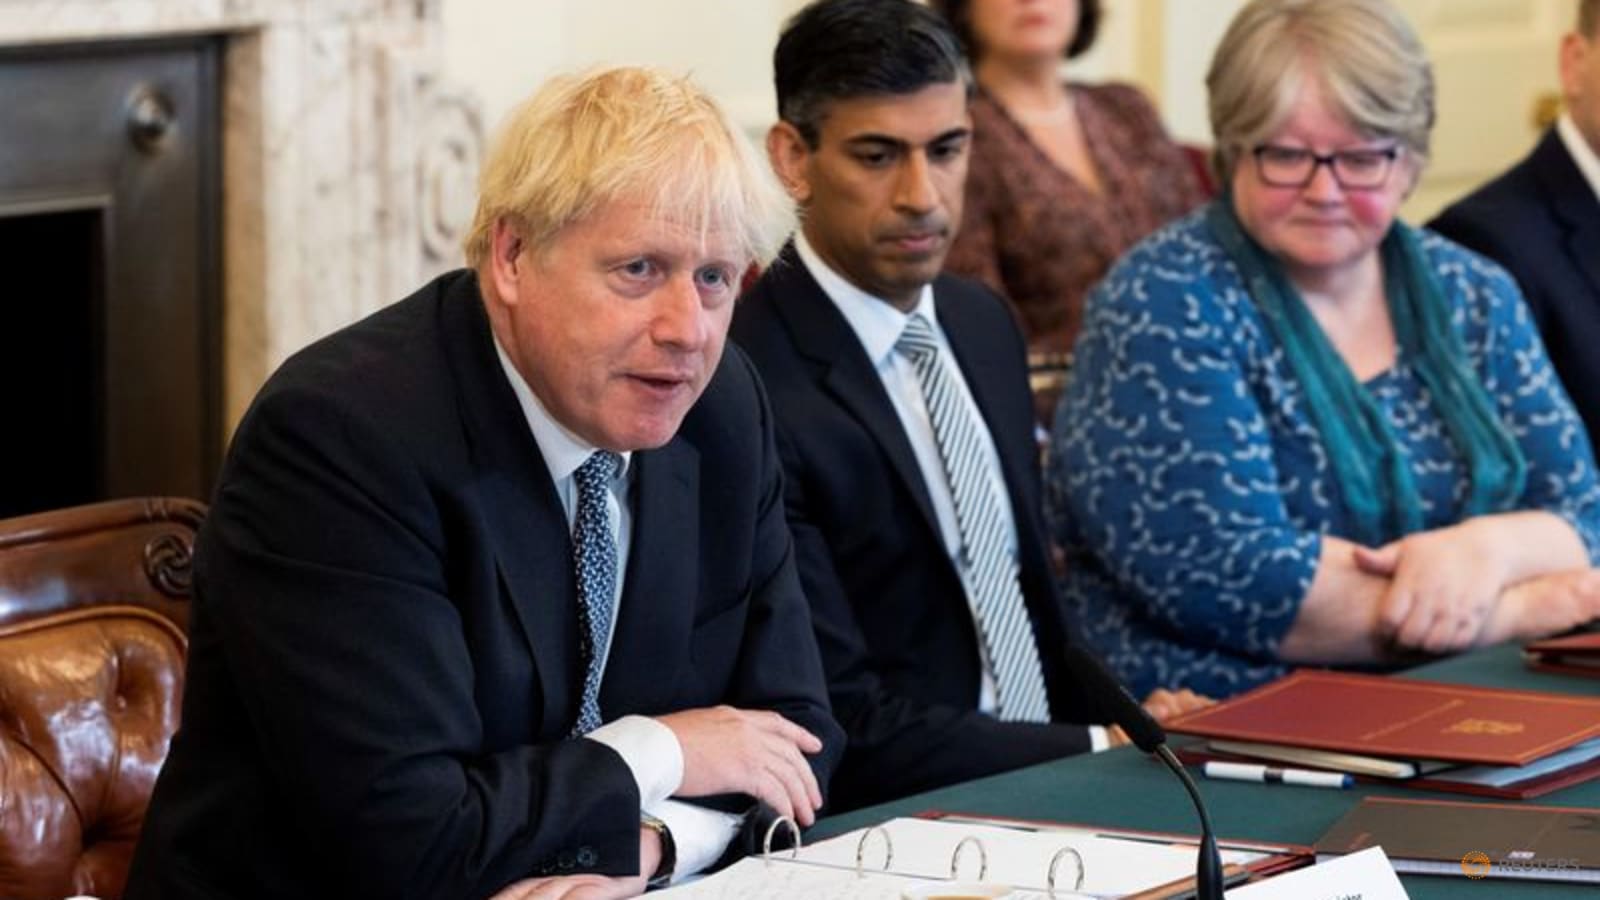 with-boris-johnson-set-to-quit,-how-will-a-new-uk-pm-be-chosen?